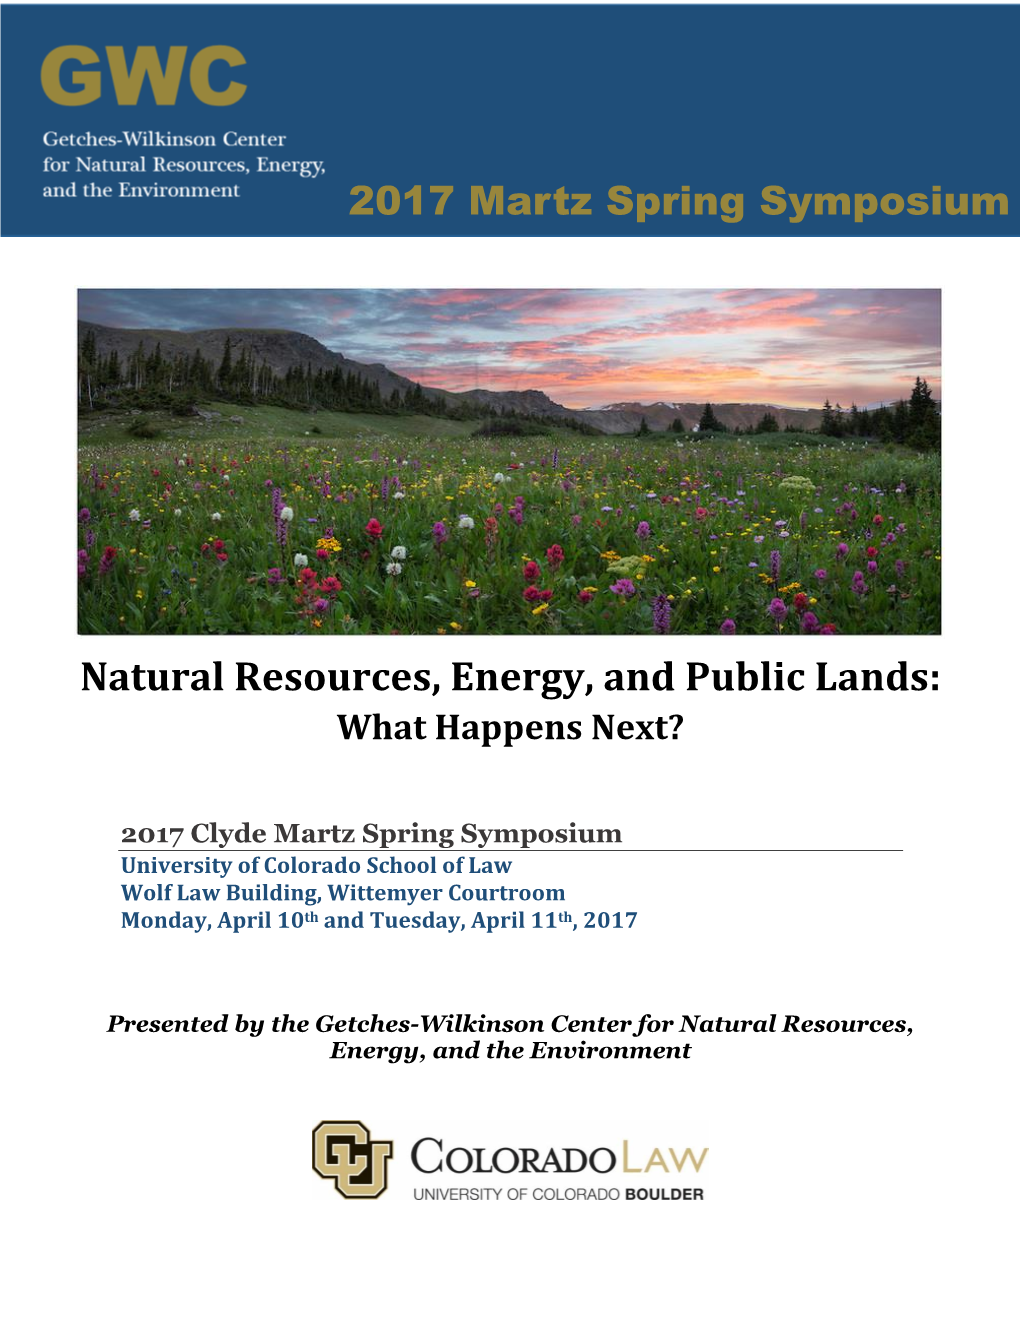 Natural Resources, Energy, and Public Lands: What Happens Next?